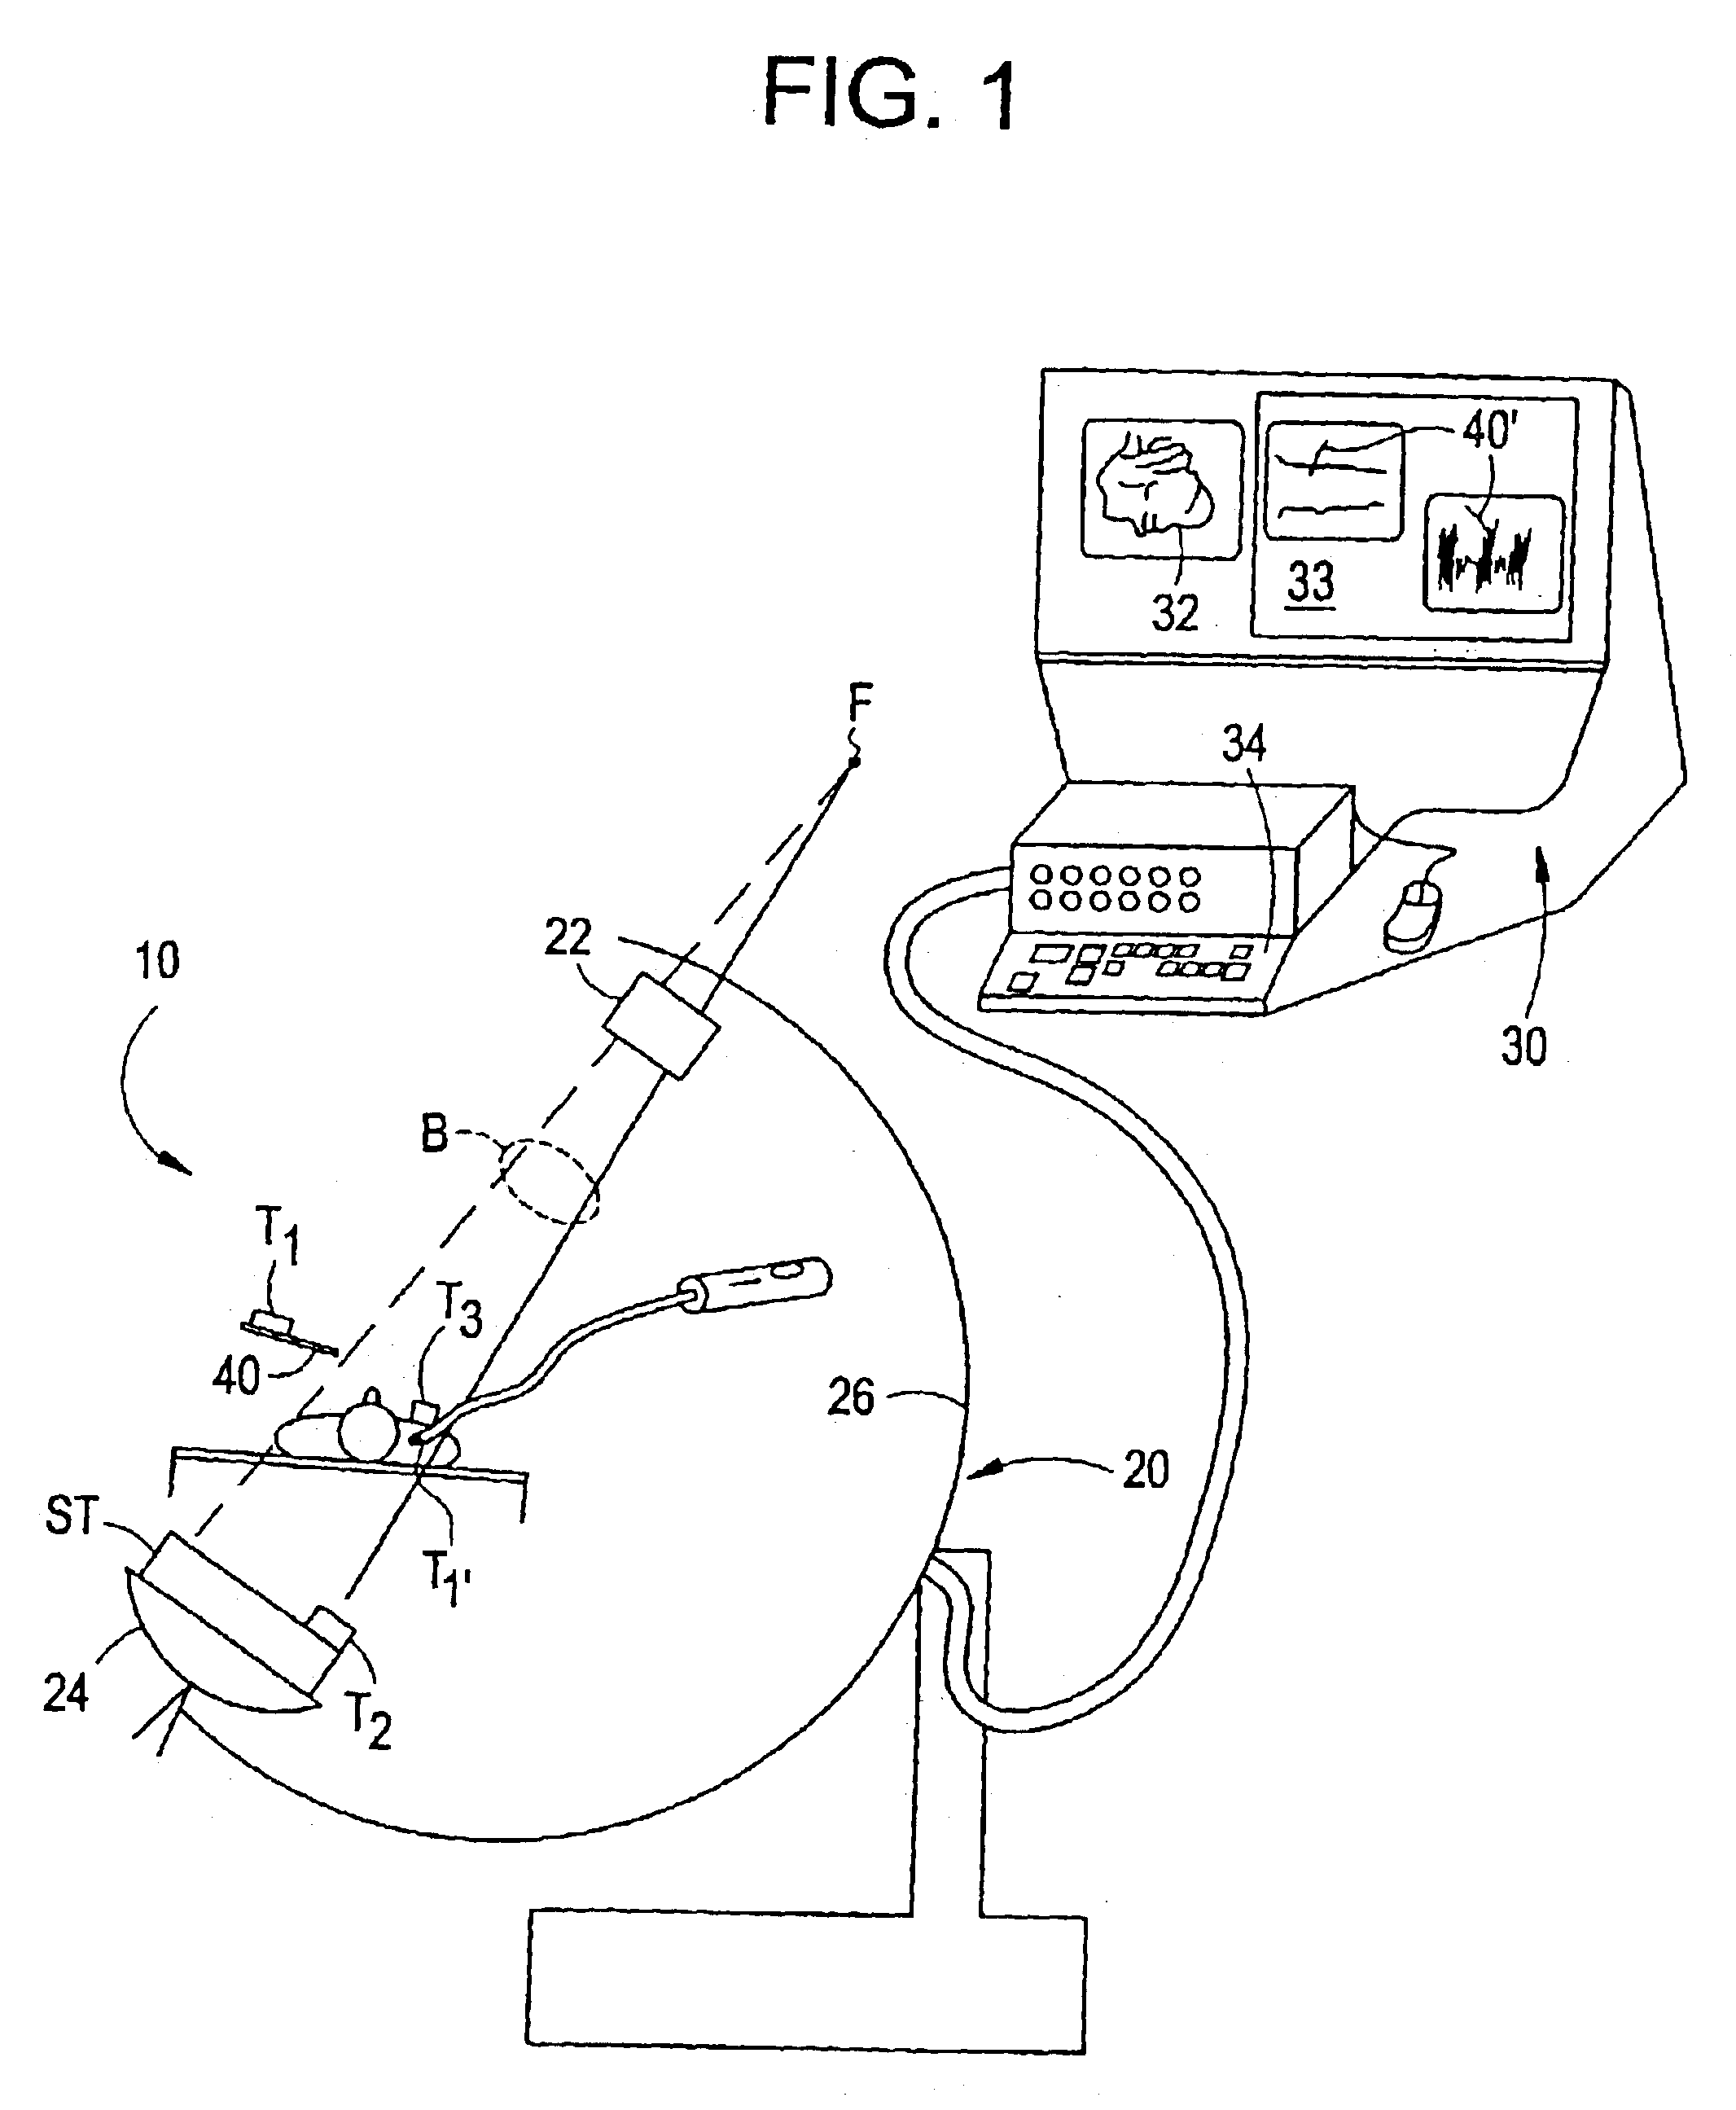 Fluoroscopic tracking and visualization system